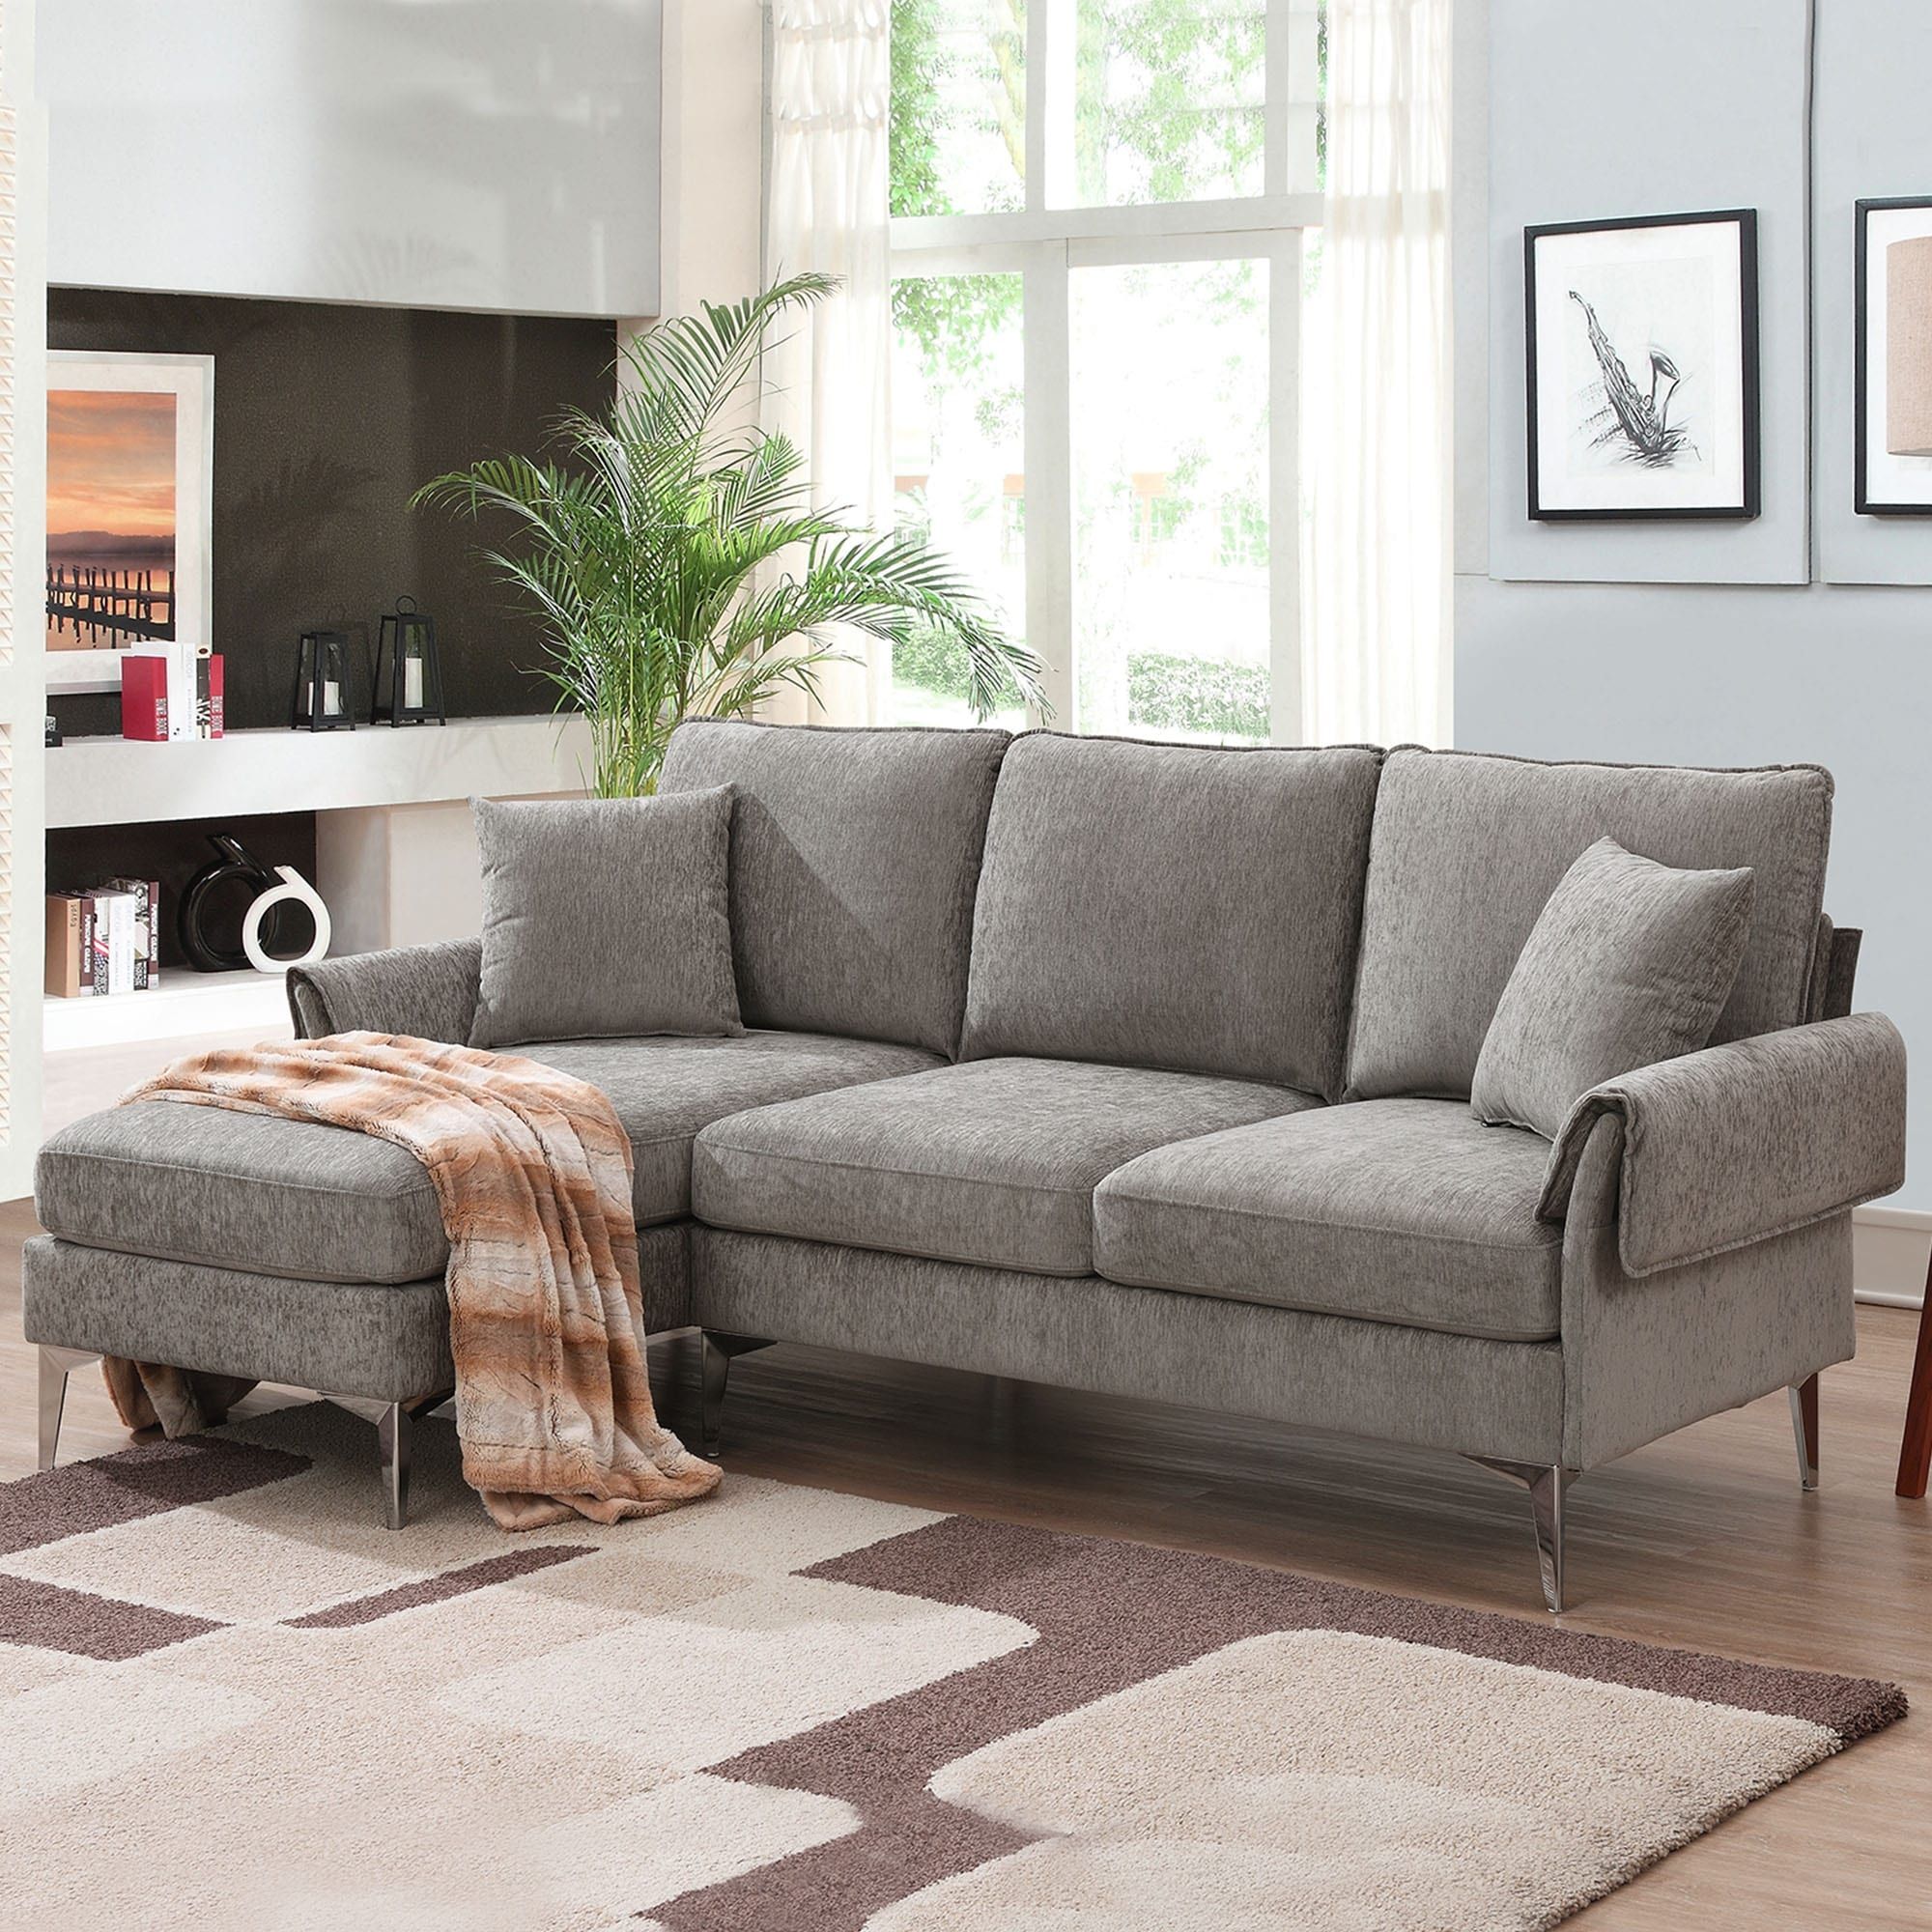 Modern Convertible Sectional Sofa, L Shaped Couch W/reversible Chaise And 2  Pillows – Bed Bath & Beyond – 37256829 With L Shape Couches With Reversible Chaises (View 6 of 15)